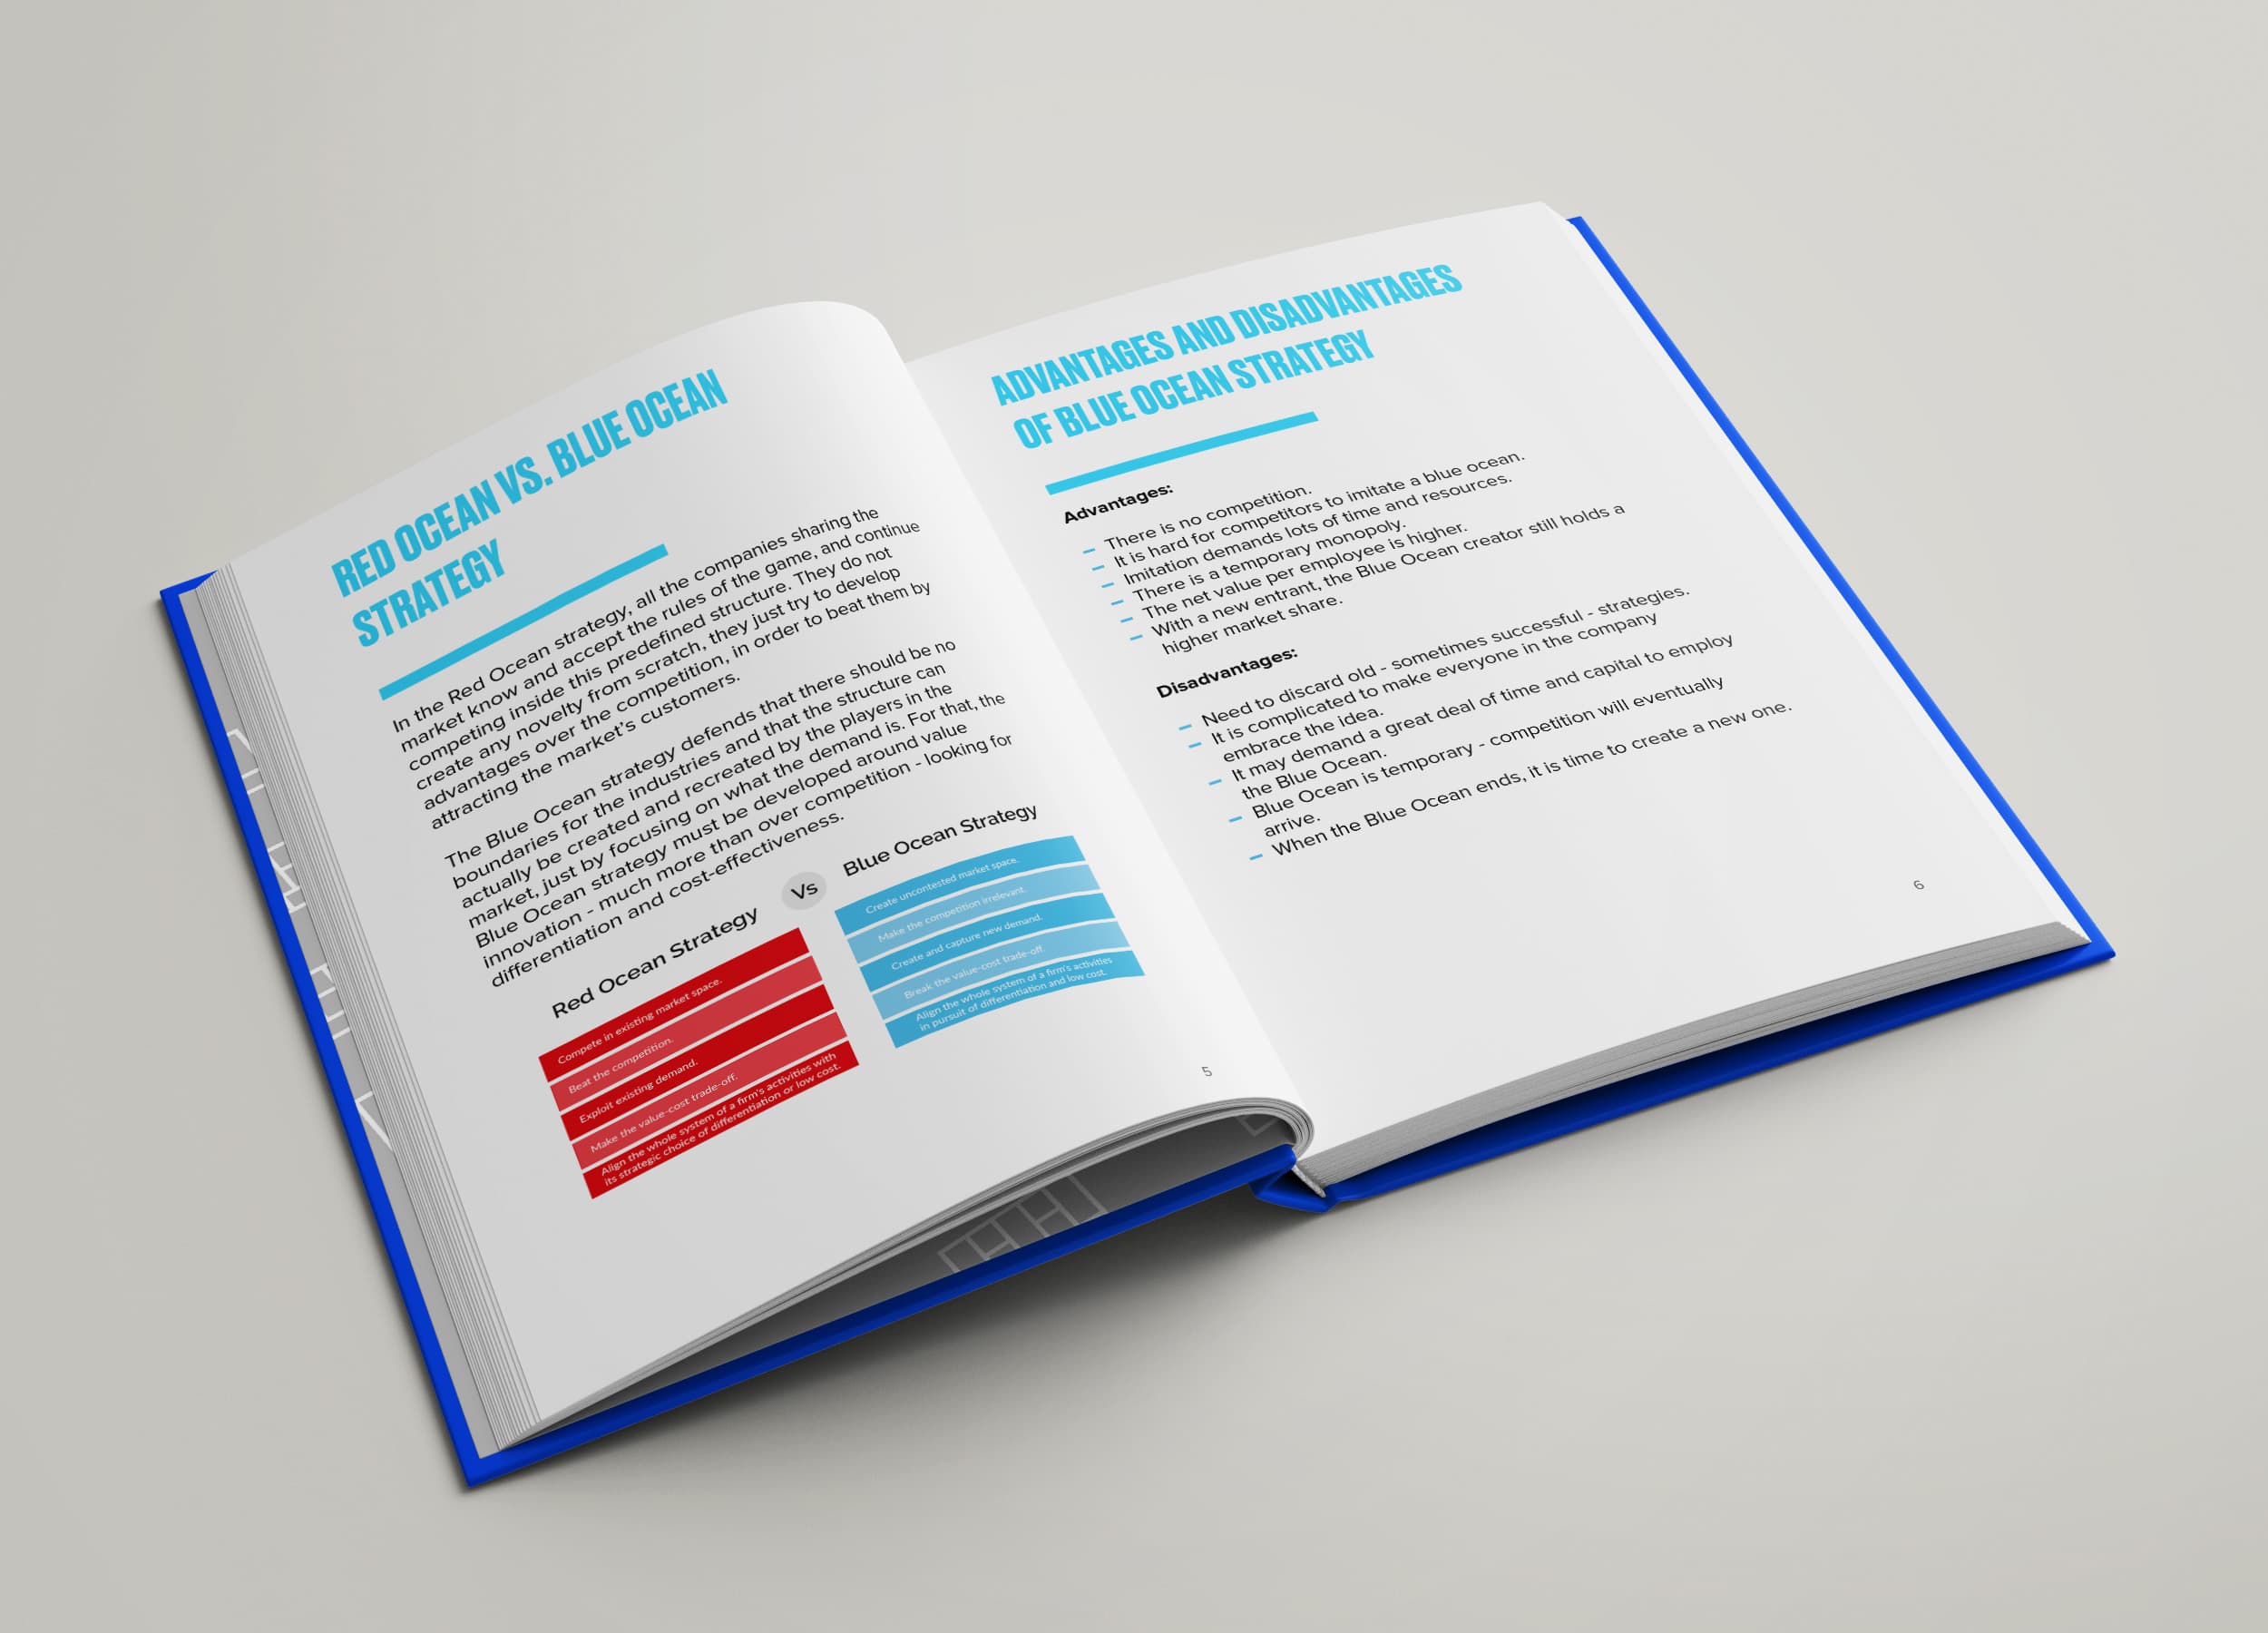 Blue Ocean Strategy - Super Guide Content Example 2